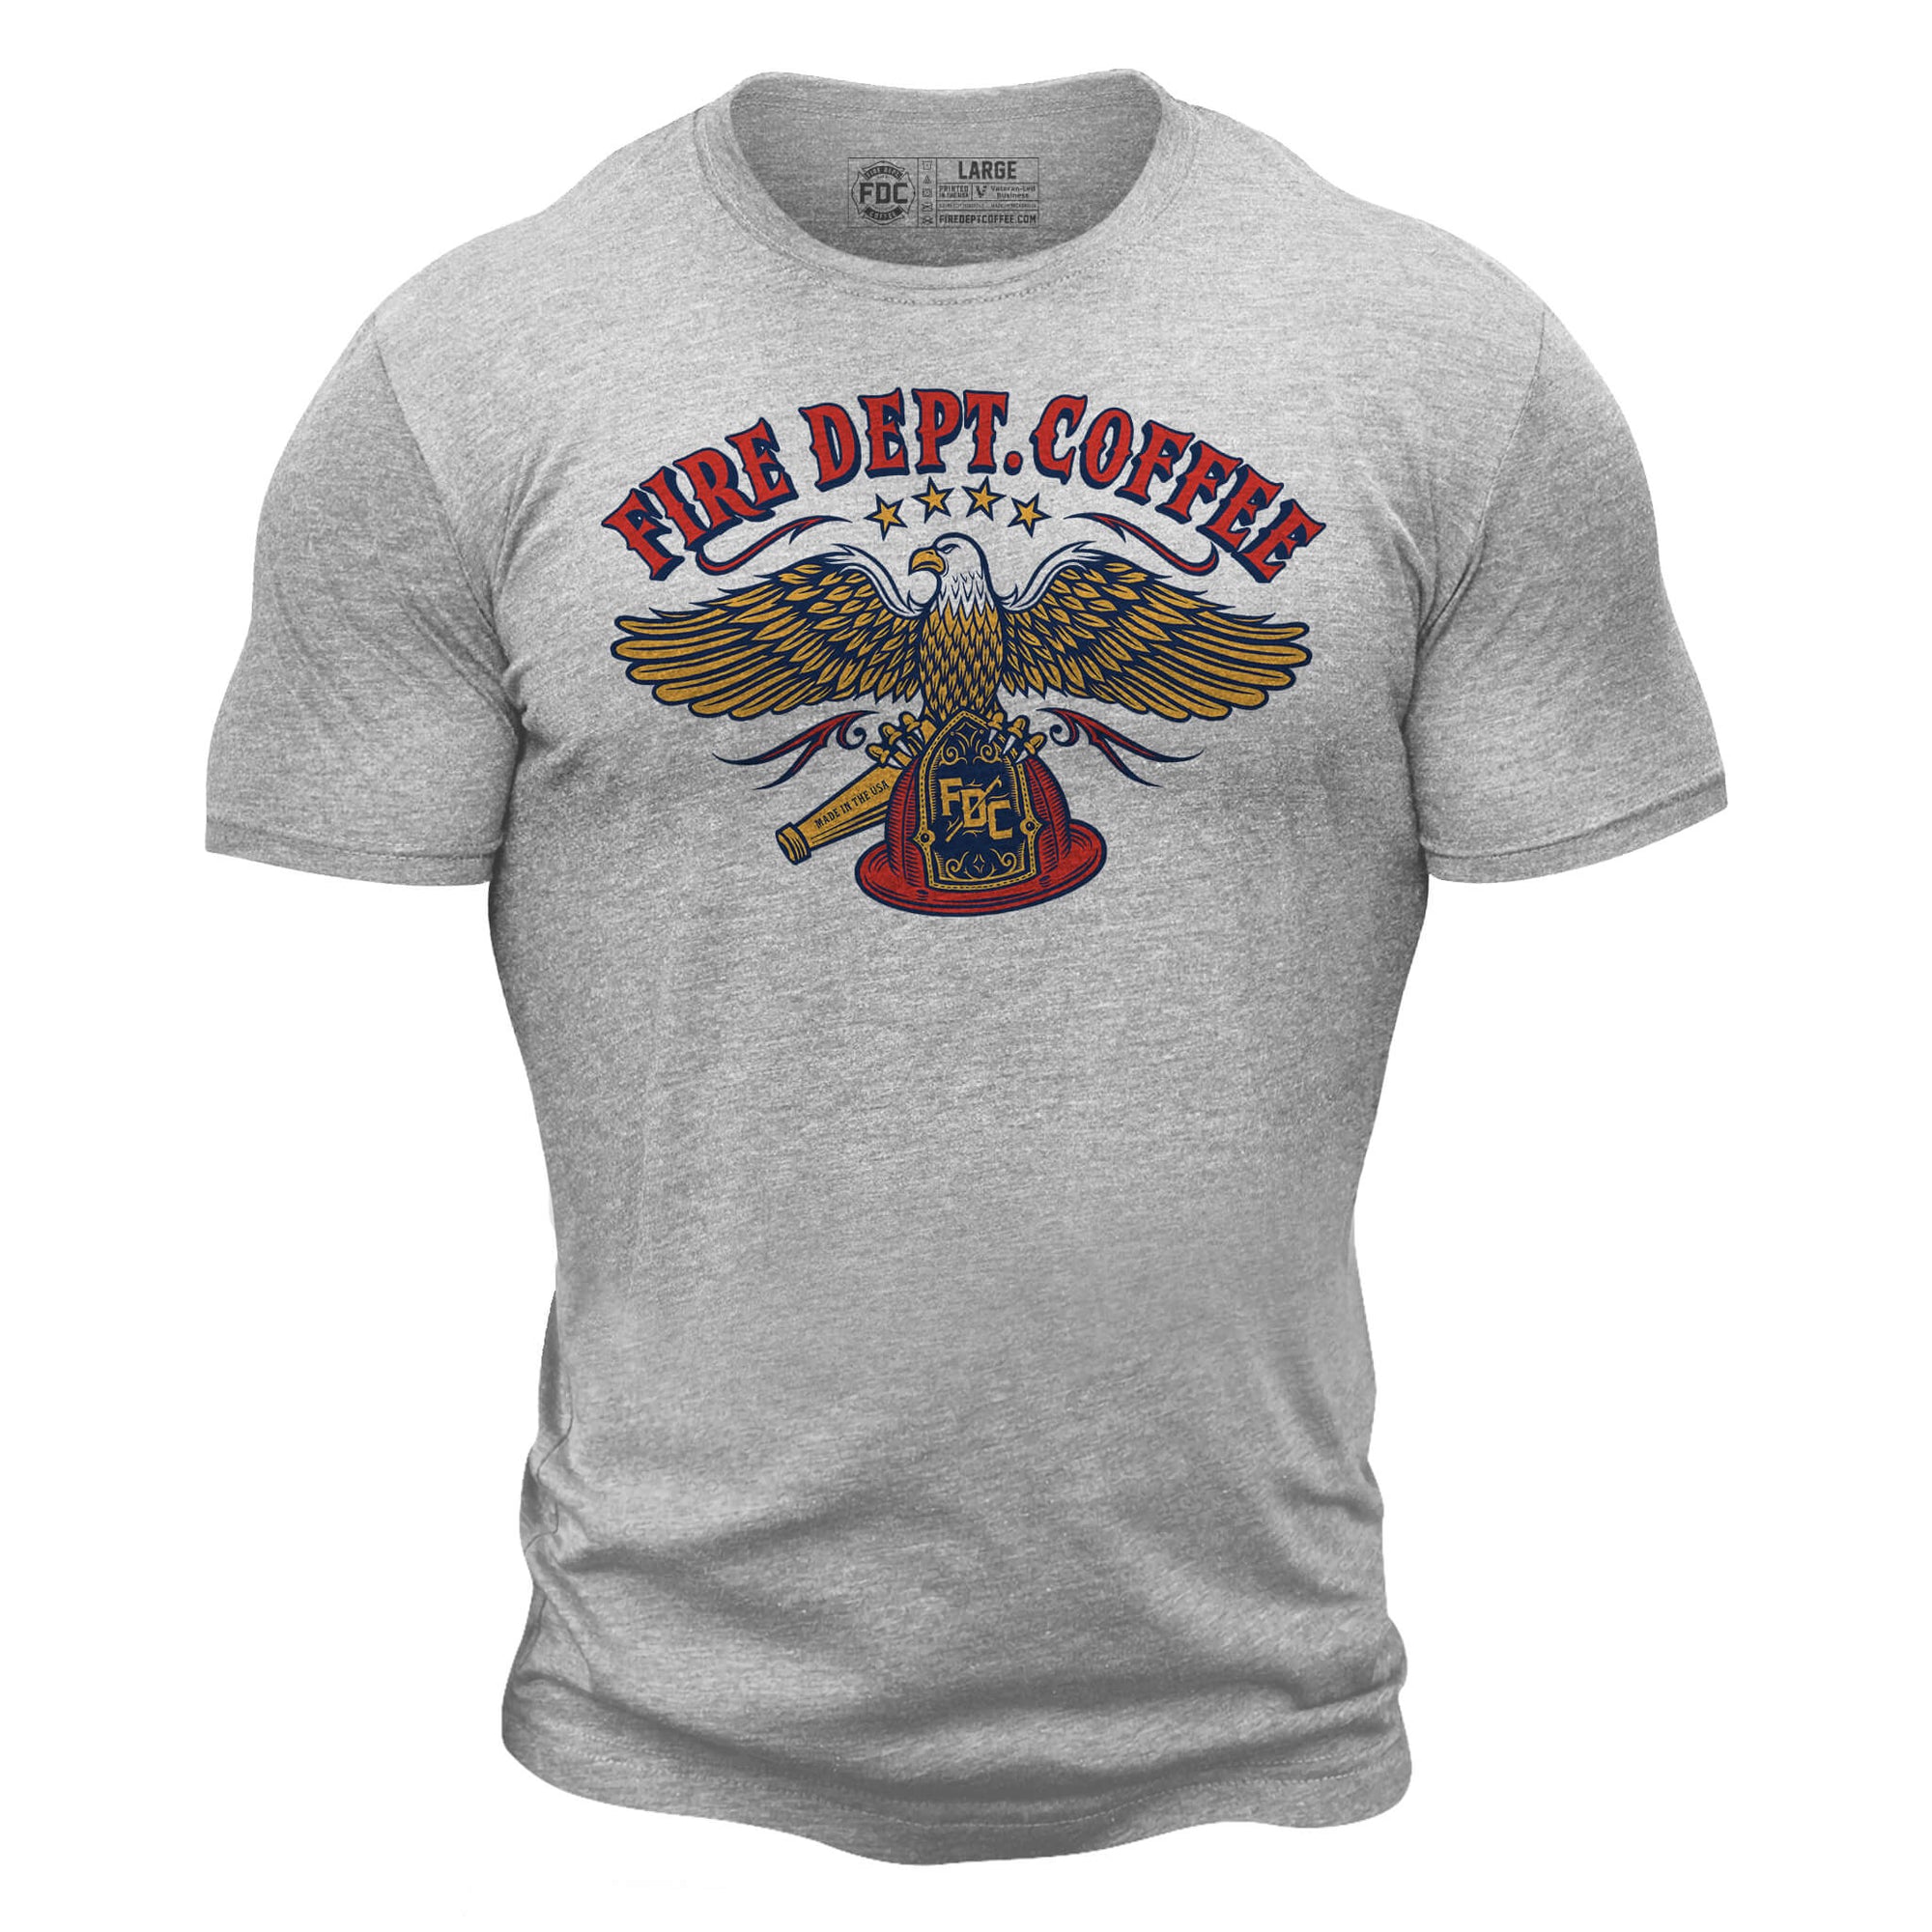 The front side of a light grey t shirt. On the chest of the t shirt is an eagle holding an FDC fire helmet. Above the eagle is text that reads "Fire Dept. Coffee"